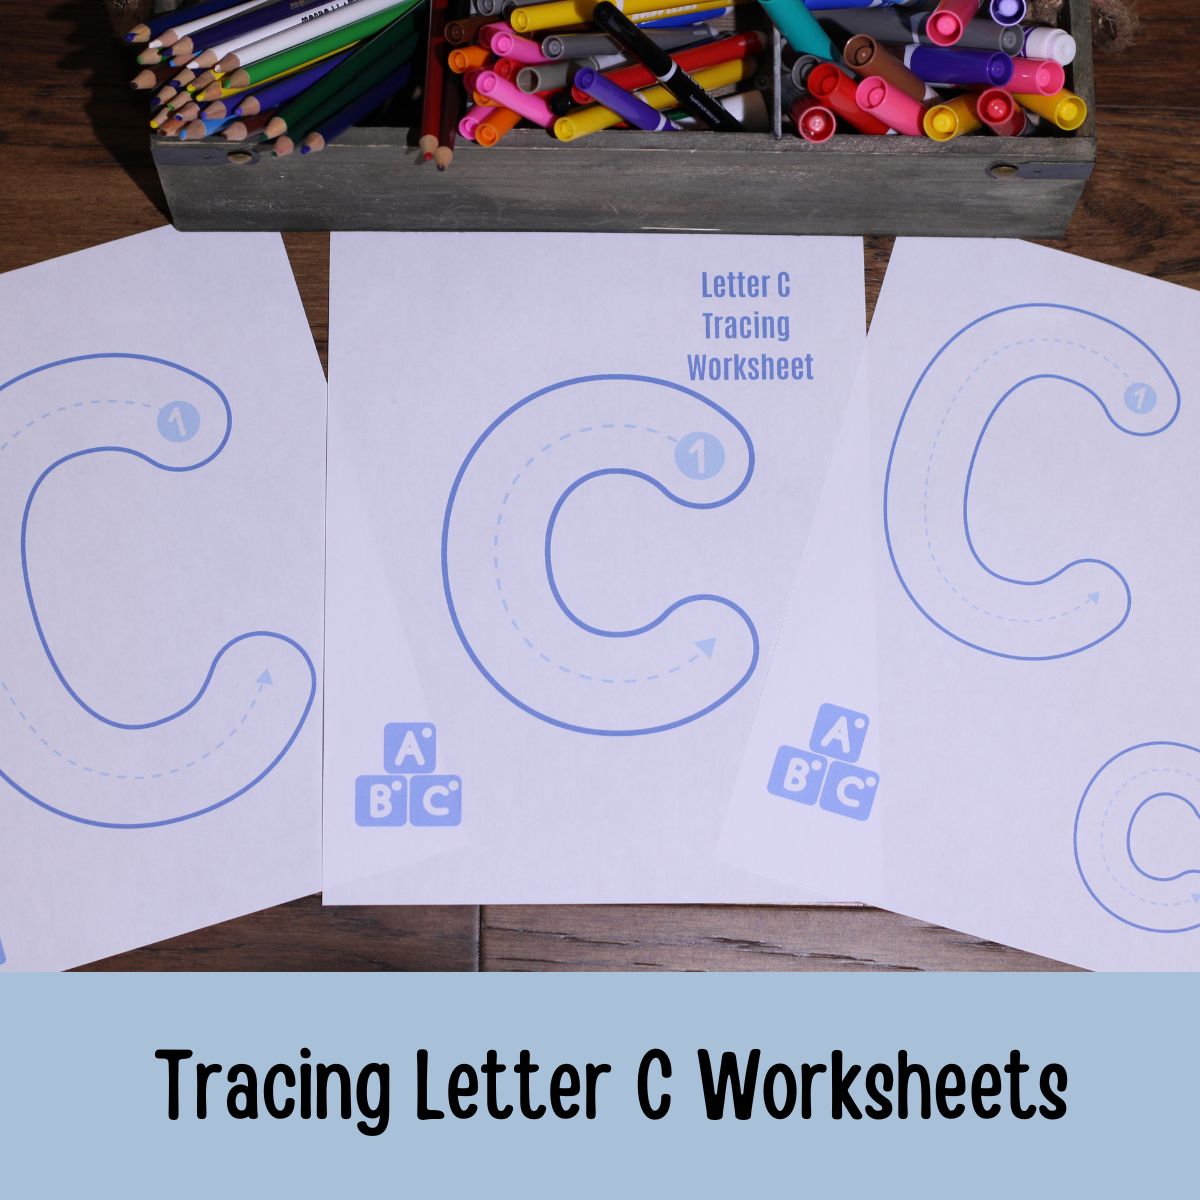 Tracing letter C Worksheets on a table with coloring utencils in the background